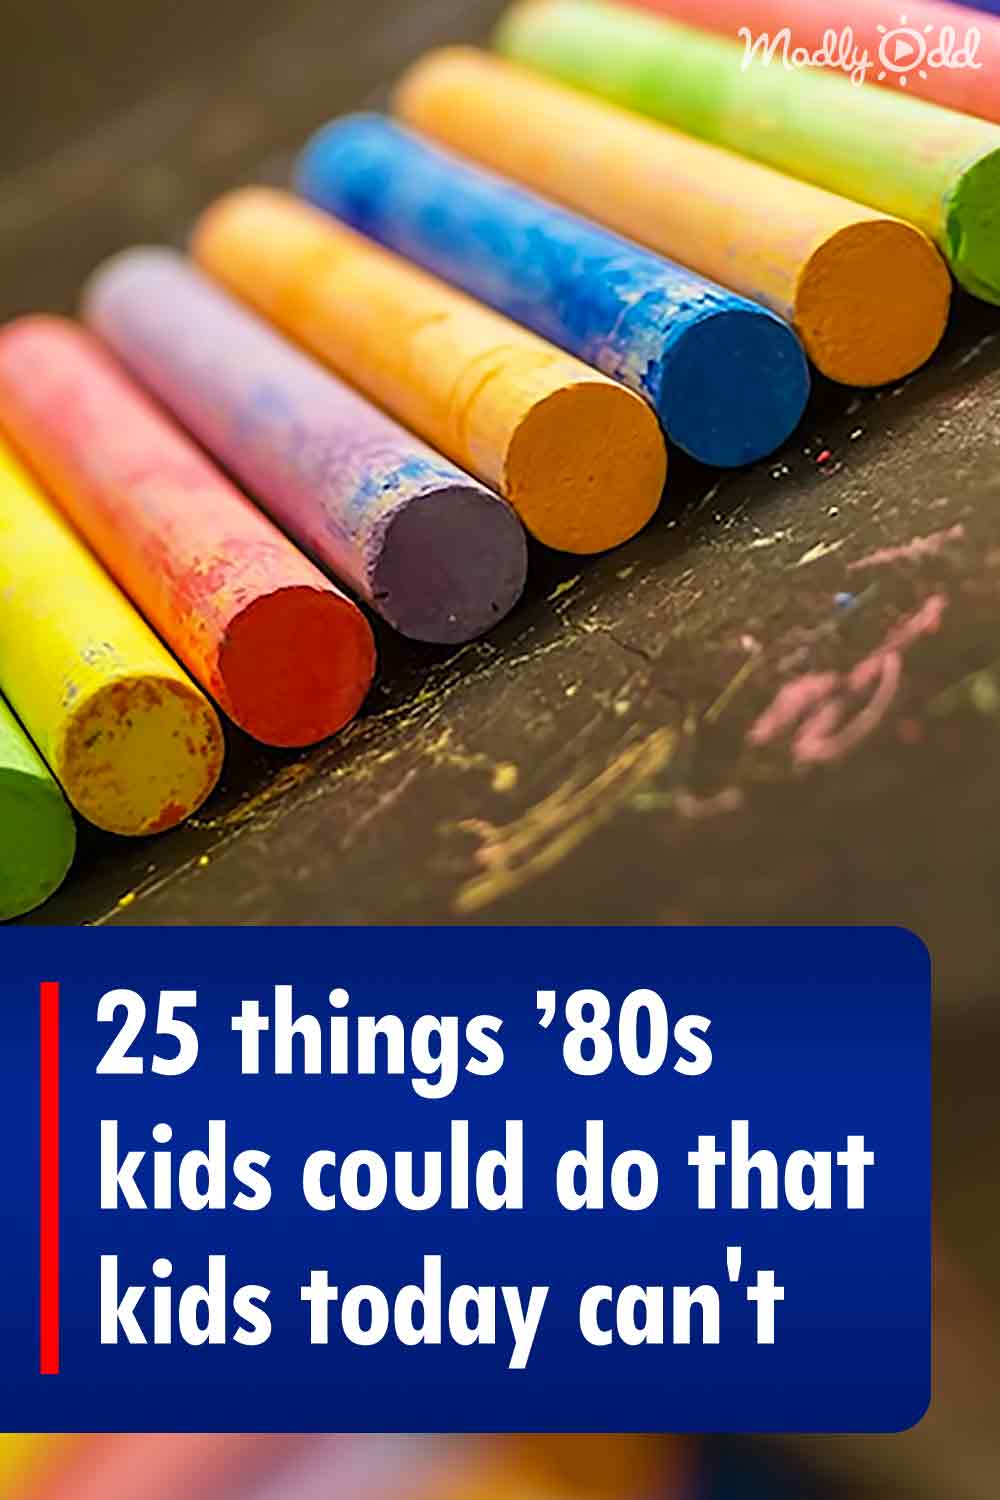 25 things ’80s kids could do that kids today can\'t